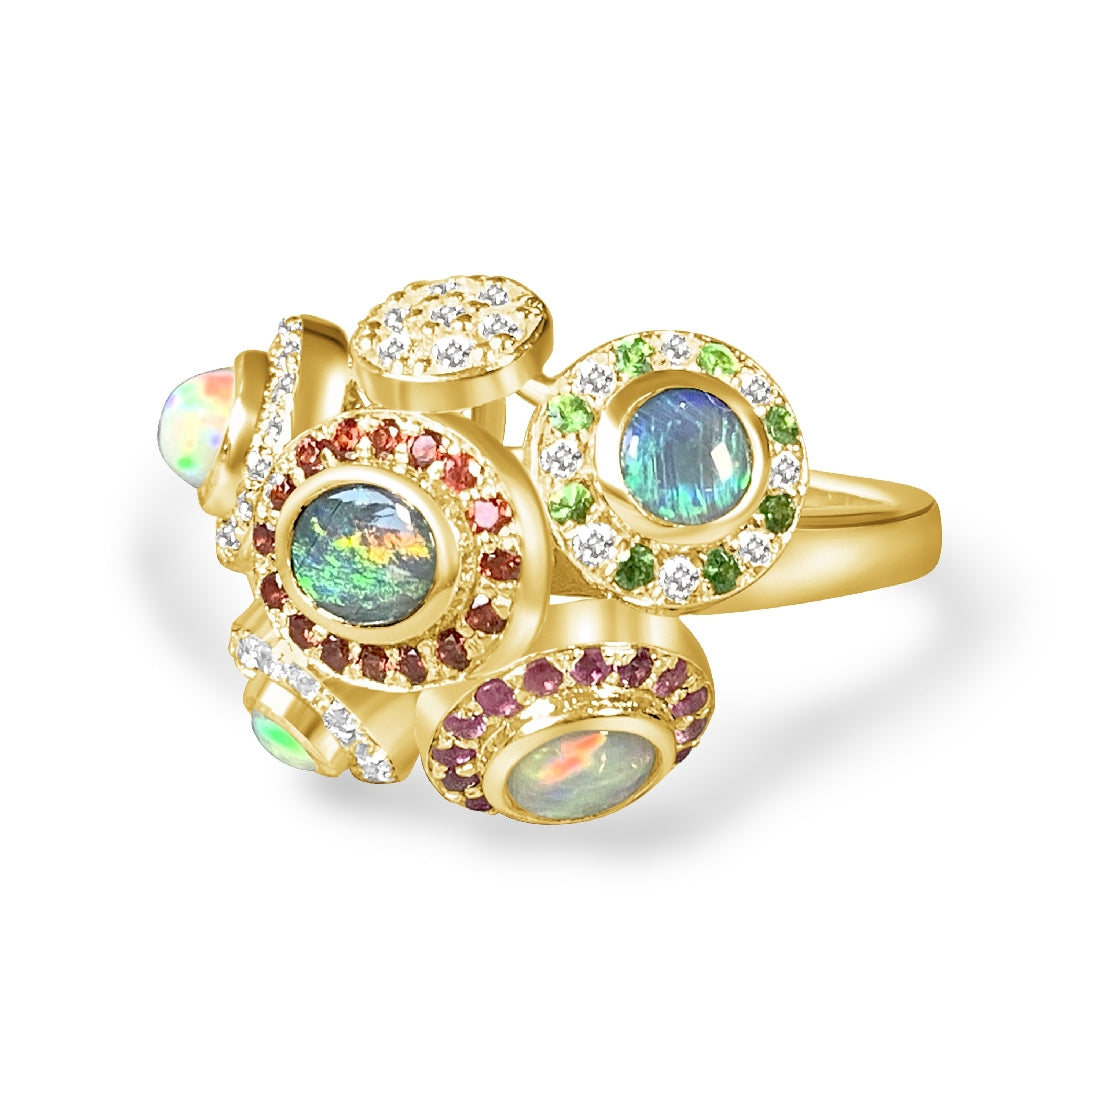 18kt Yellow Gold designer cluster ring with multi colour Opals, Diamonds, Sapphires and Rubies - Masterpiece Jewellery Opal & Gems Sydney Australia | Online Shop